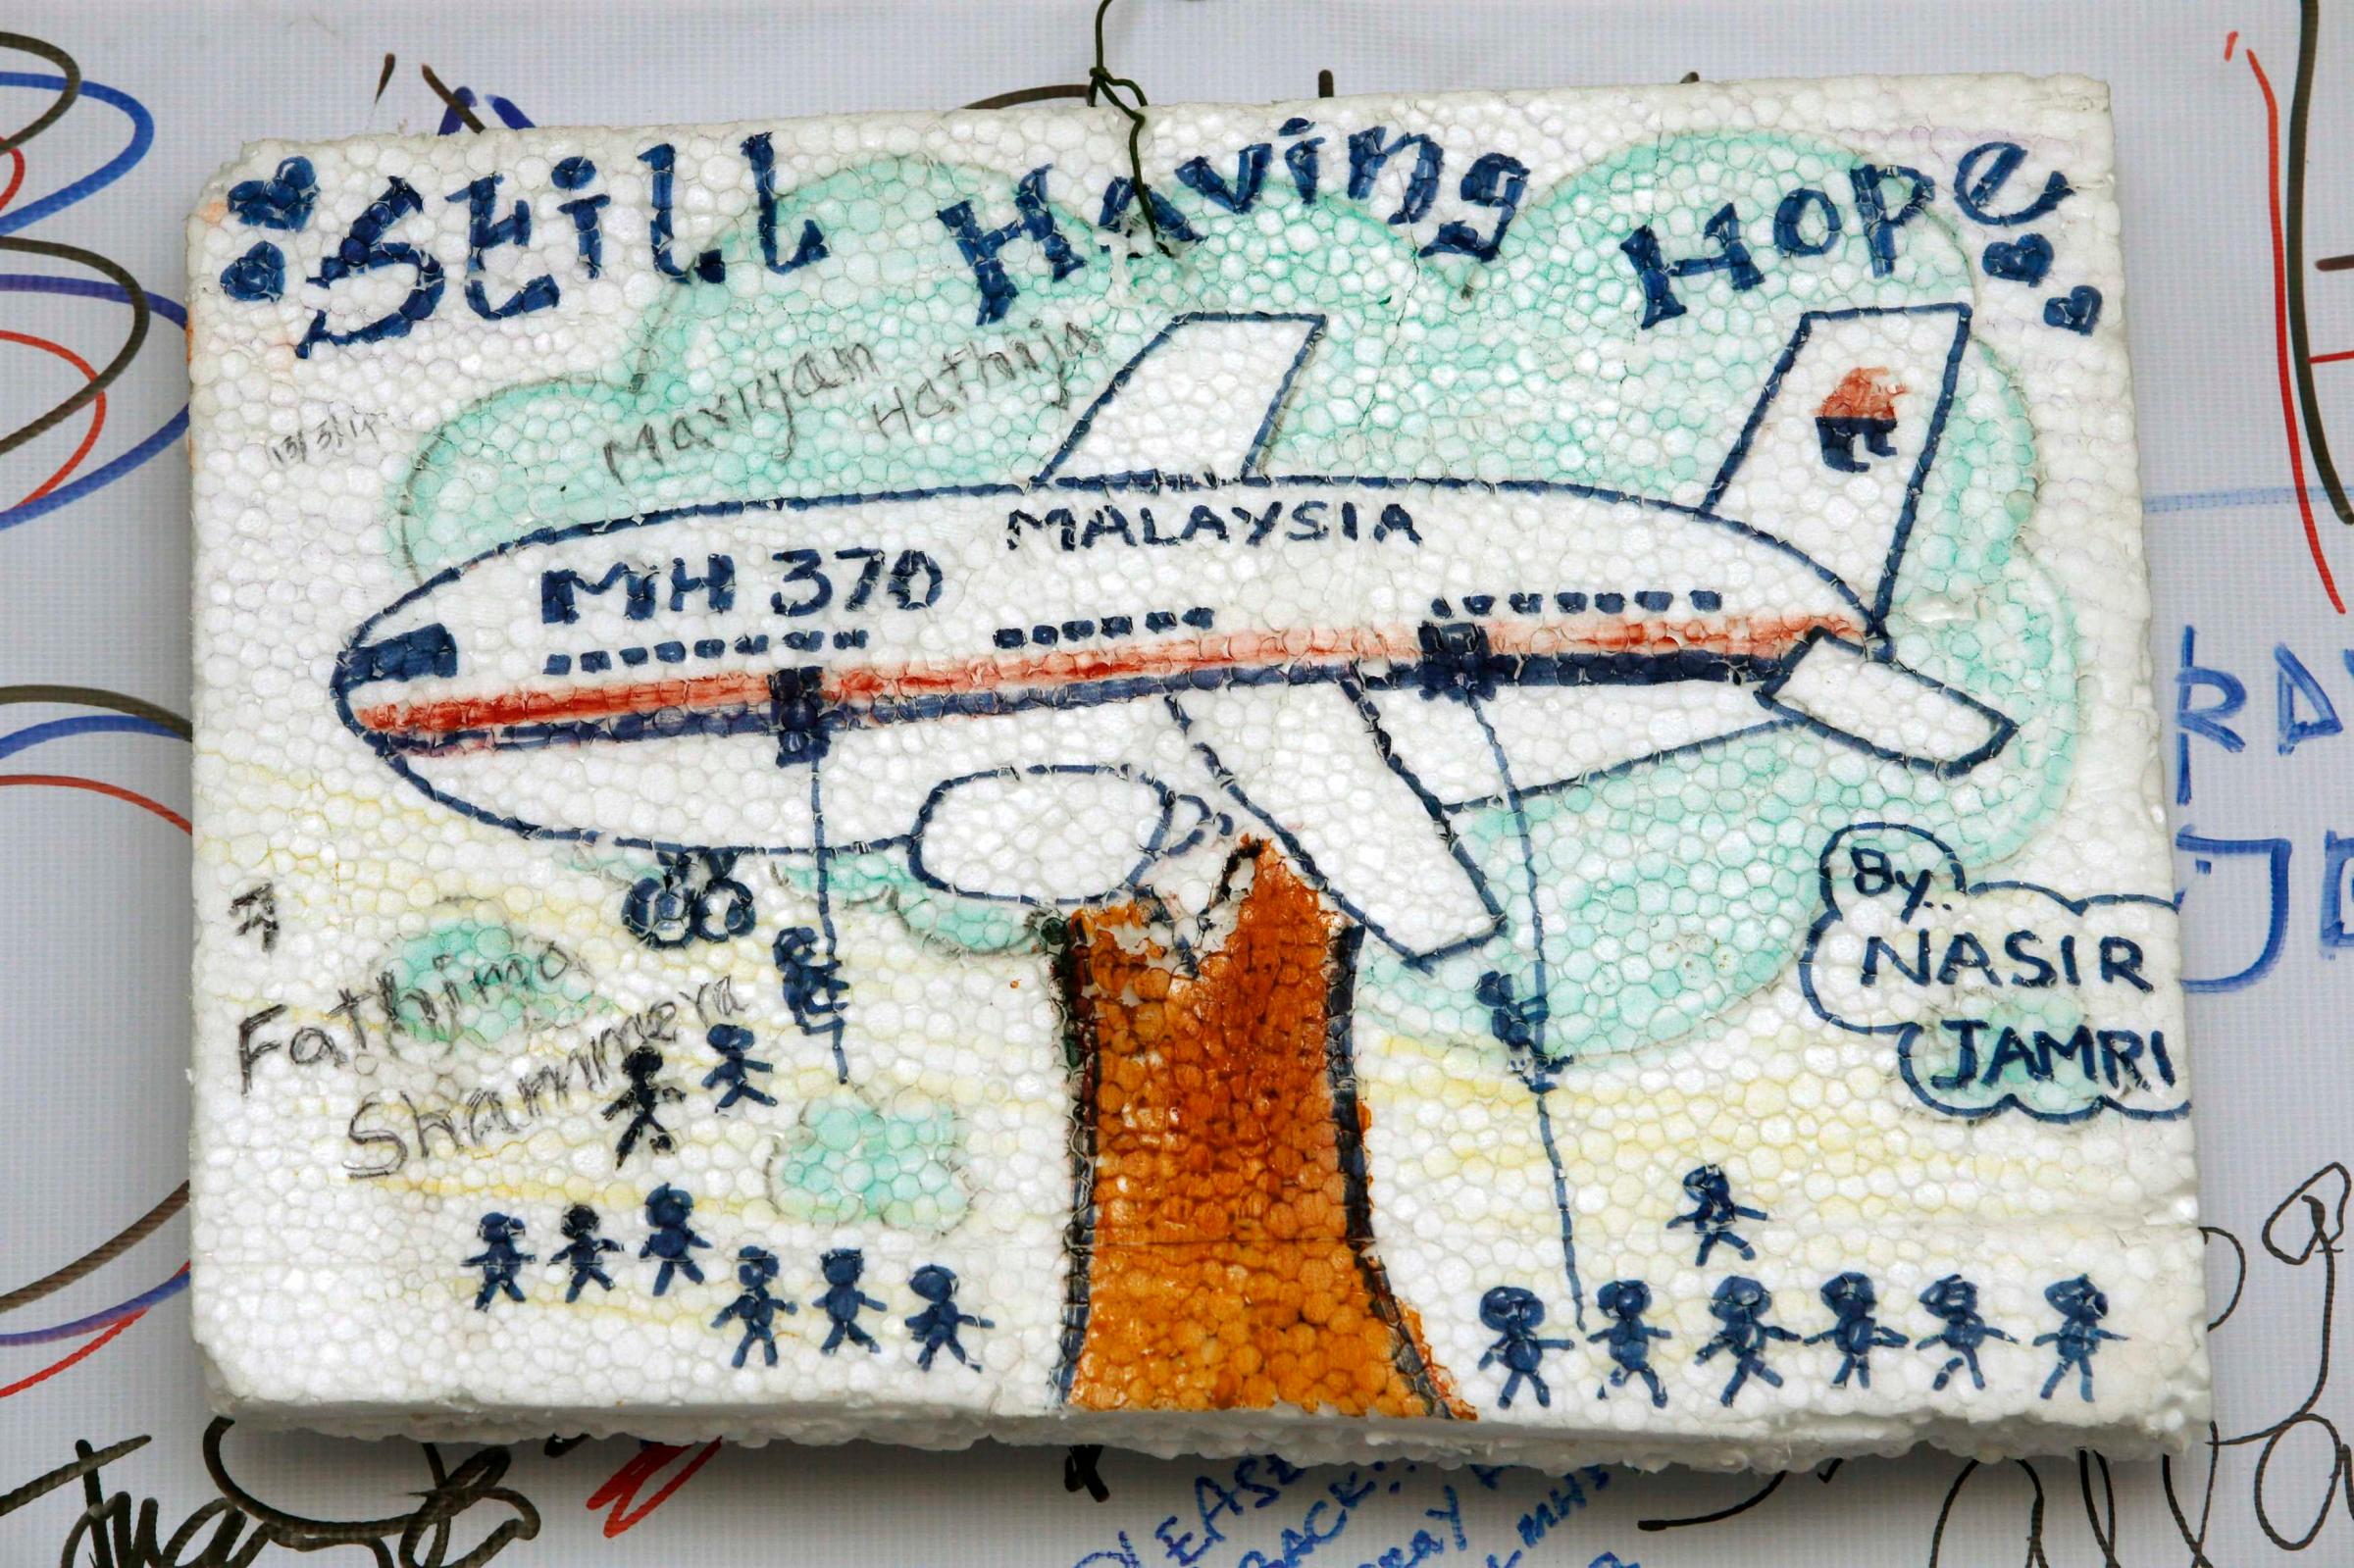 An artwork conveying well-wishes for the missing Malaysia Airlines Flight MH370 is seen in Kuala Lumpur International Airport